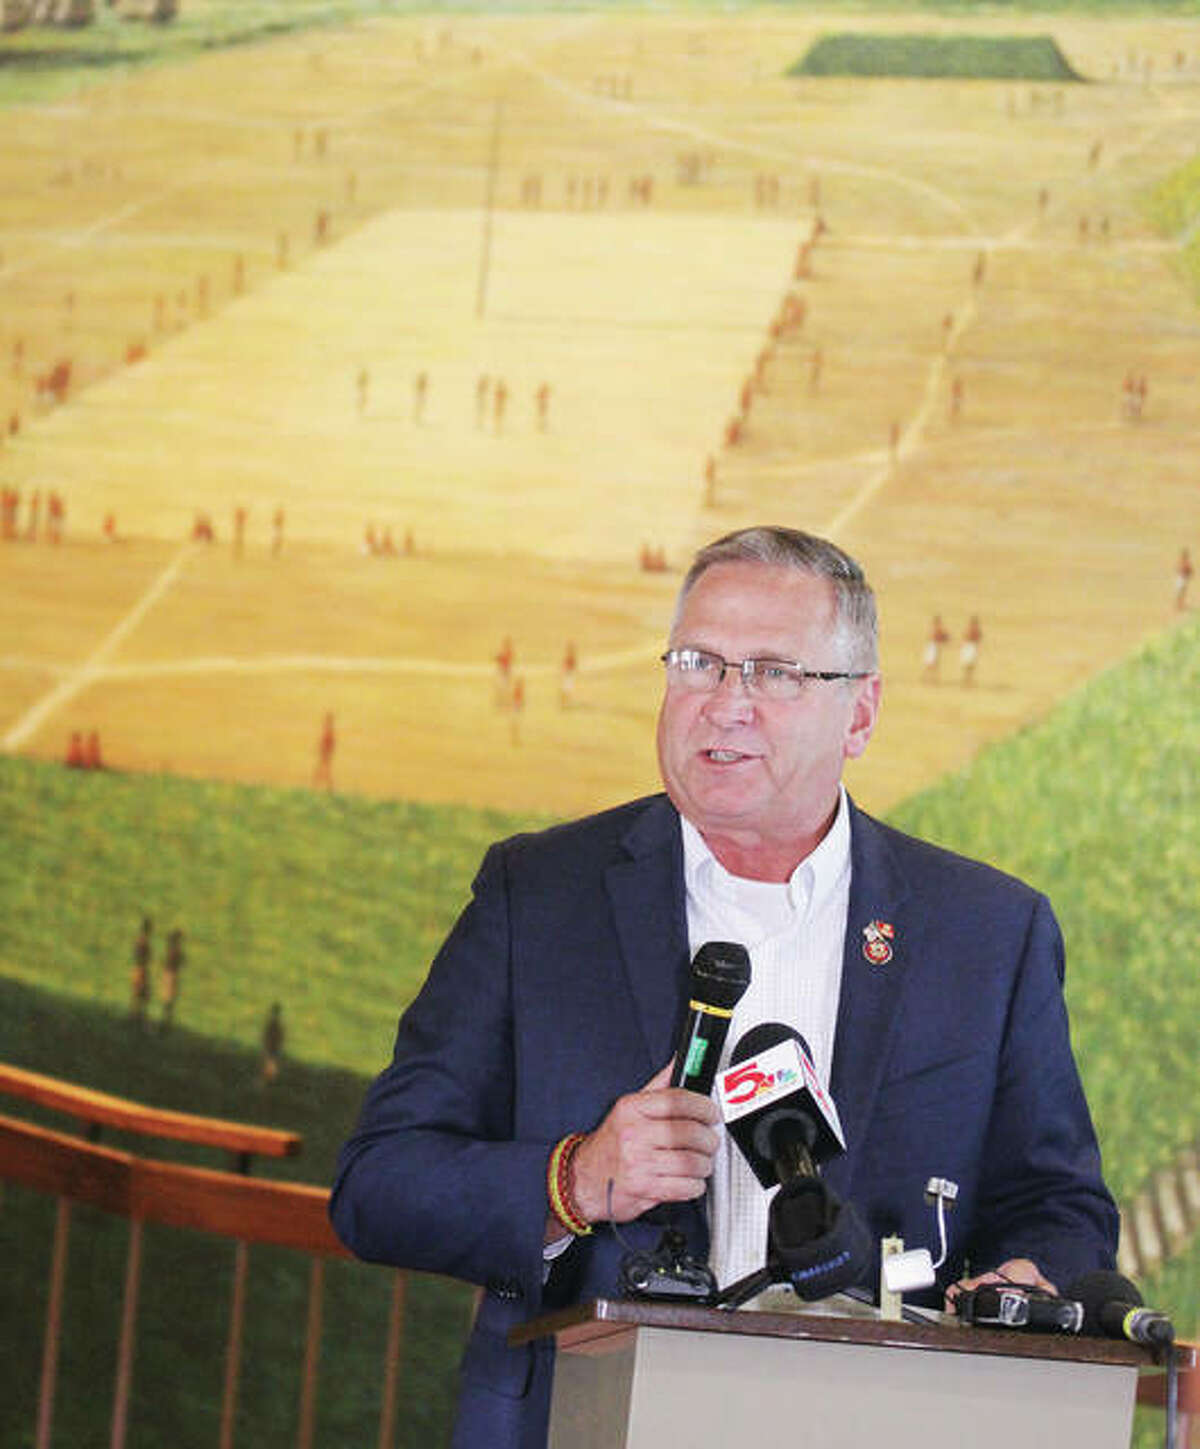 U.S. Rep. Mike Bost, R-Murphysboro, talks Tuesday in front of a mural depicting the ancient city of Cahokia at its height during a press conference at the Cahokia Mounds State Historic Site Interpretive Center. The mural depicts the city’s residents playing a game called Chunkey. Bost has introduced legislation to elevate Cahokia Mounds and related local sites to national park status.